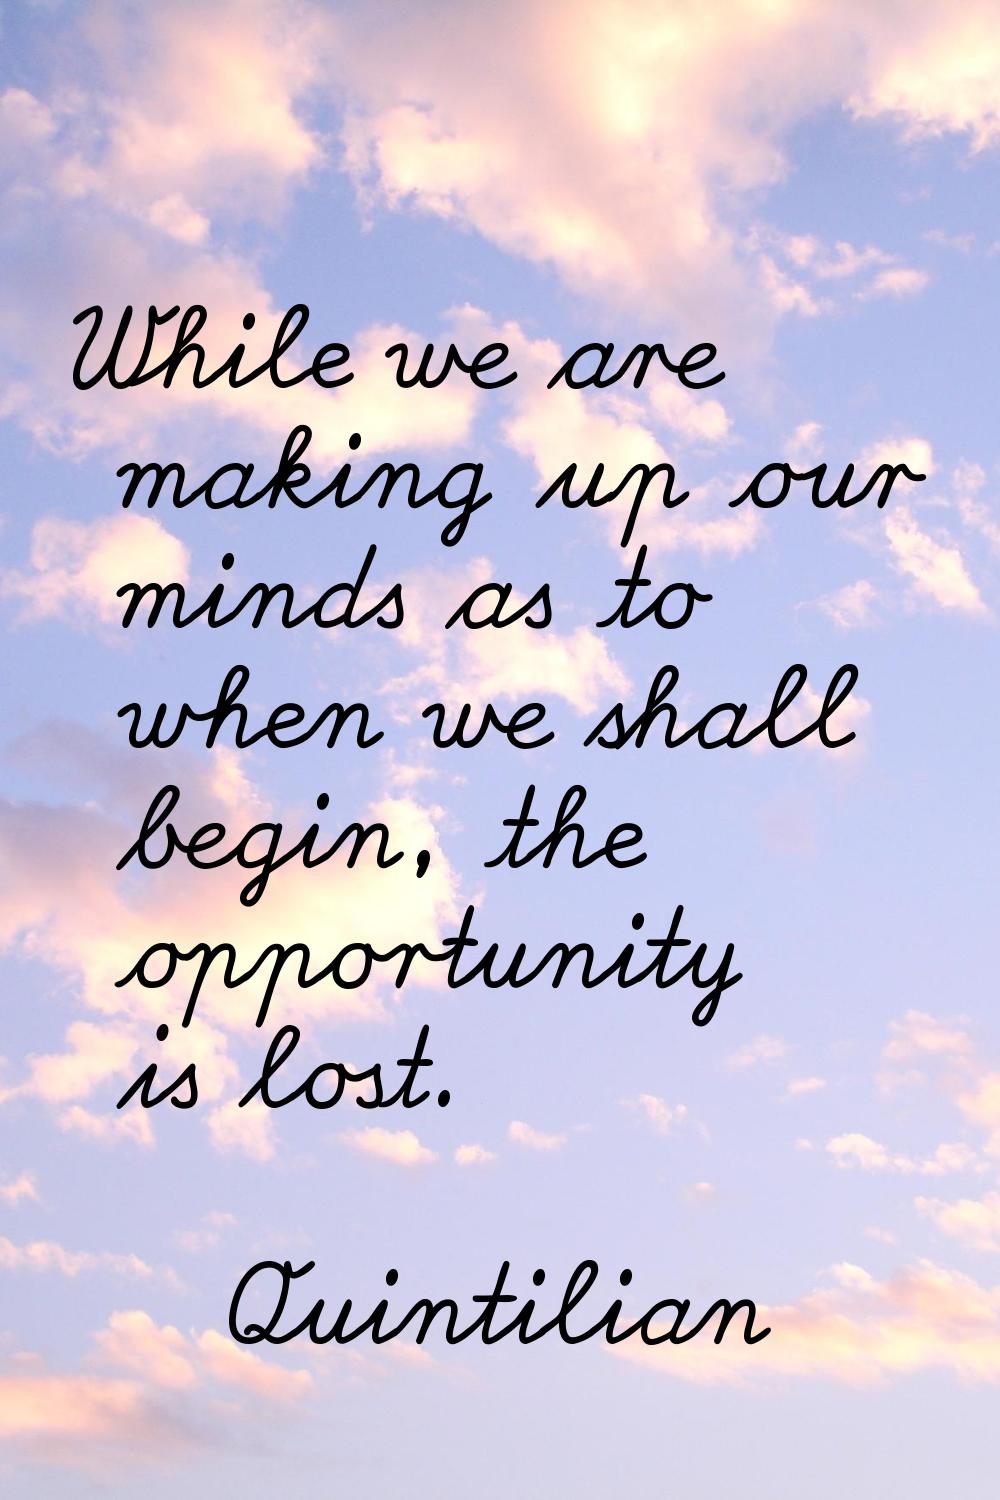 While we are making up our minds as to when we shall begin, the opportunity is lost.